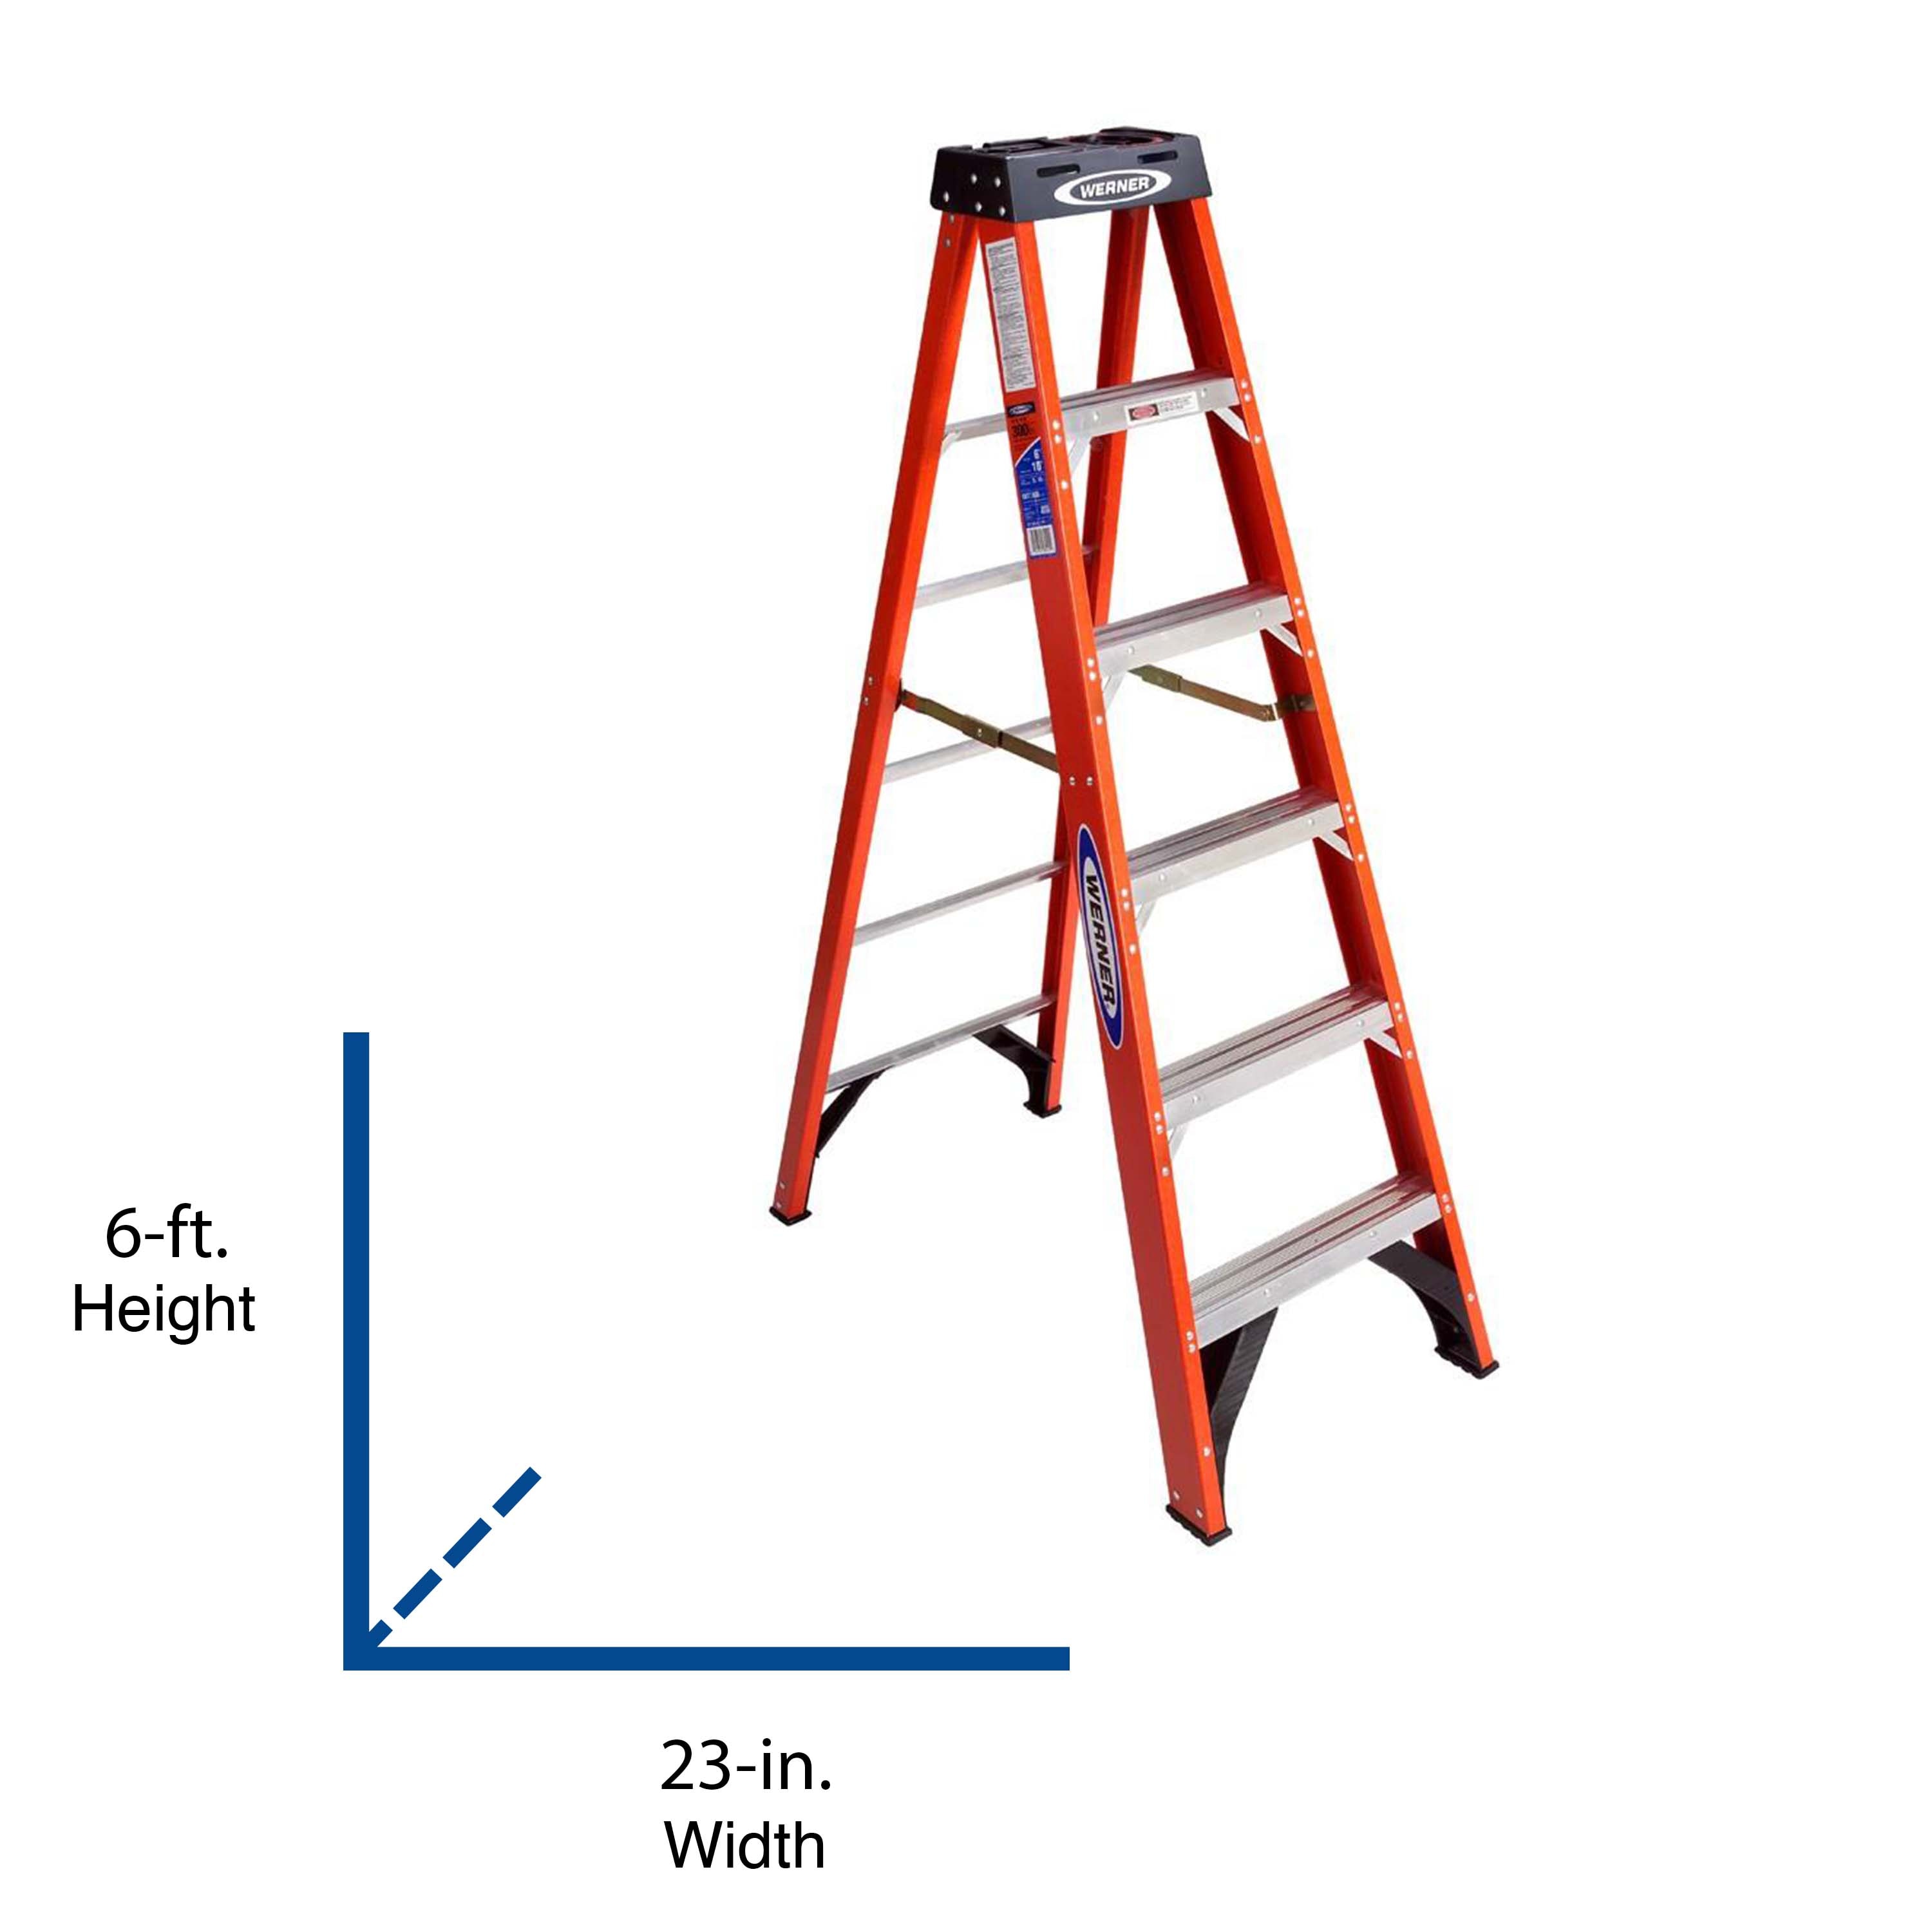 Werner Fiberglass Step Ladder 300 Lbs Load Capacity Type Ia Duty Rating NXT1A06 for sale online 